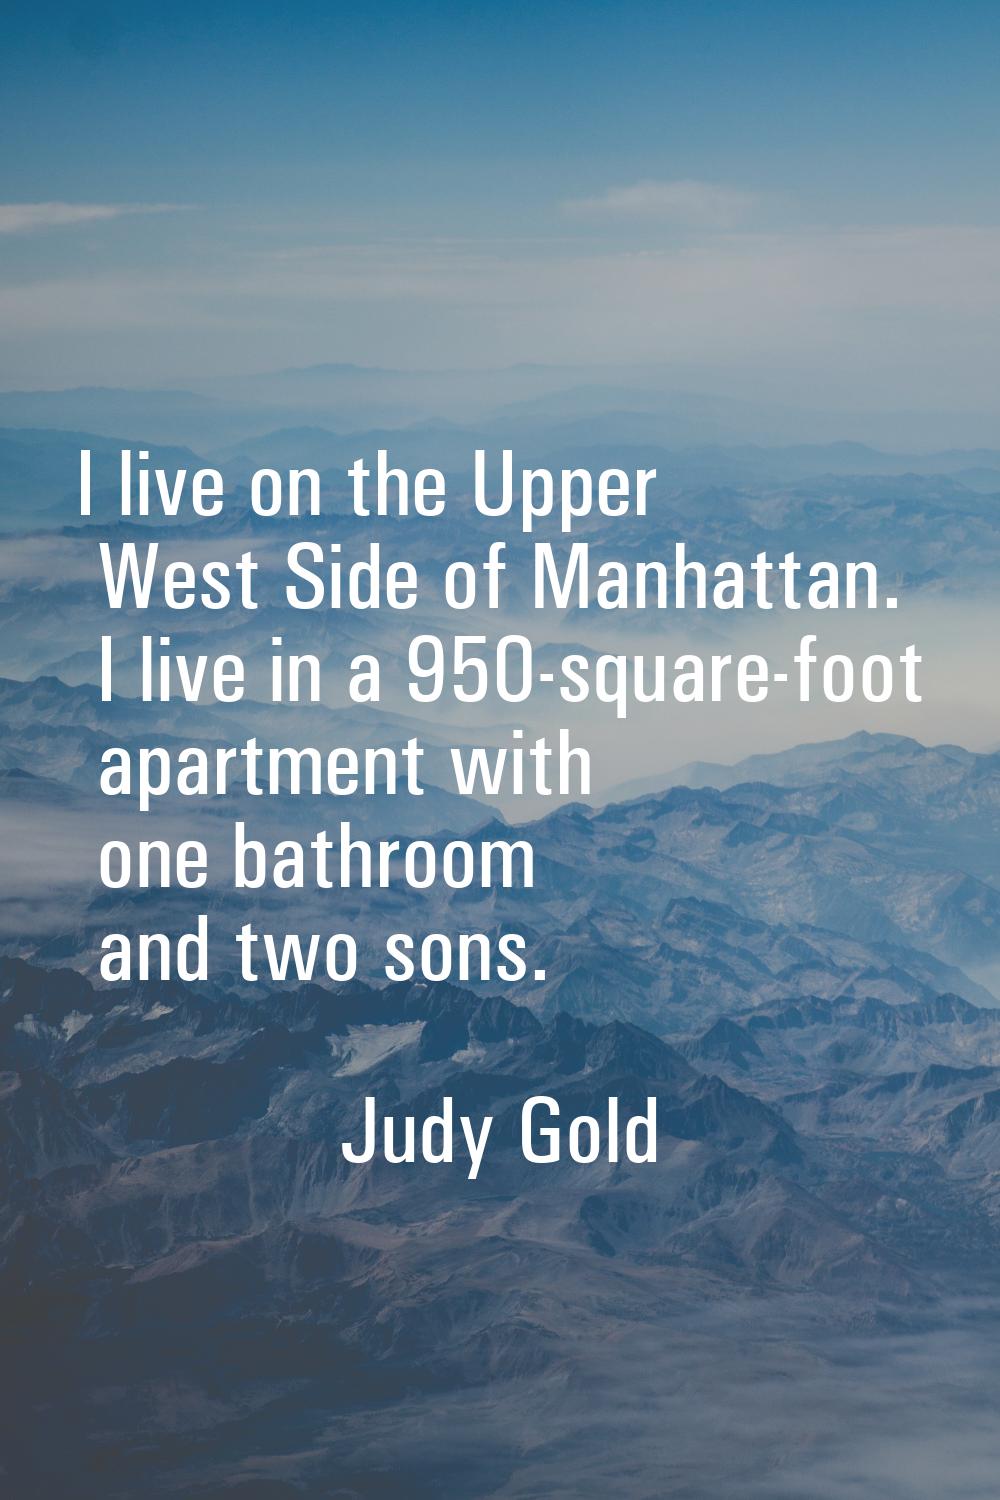 I live on the Upper West Side of Manhattan. I live in a 950-square-foot apartment with one bathroom